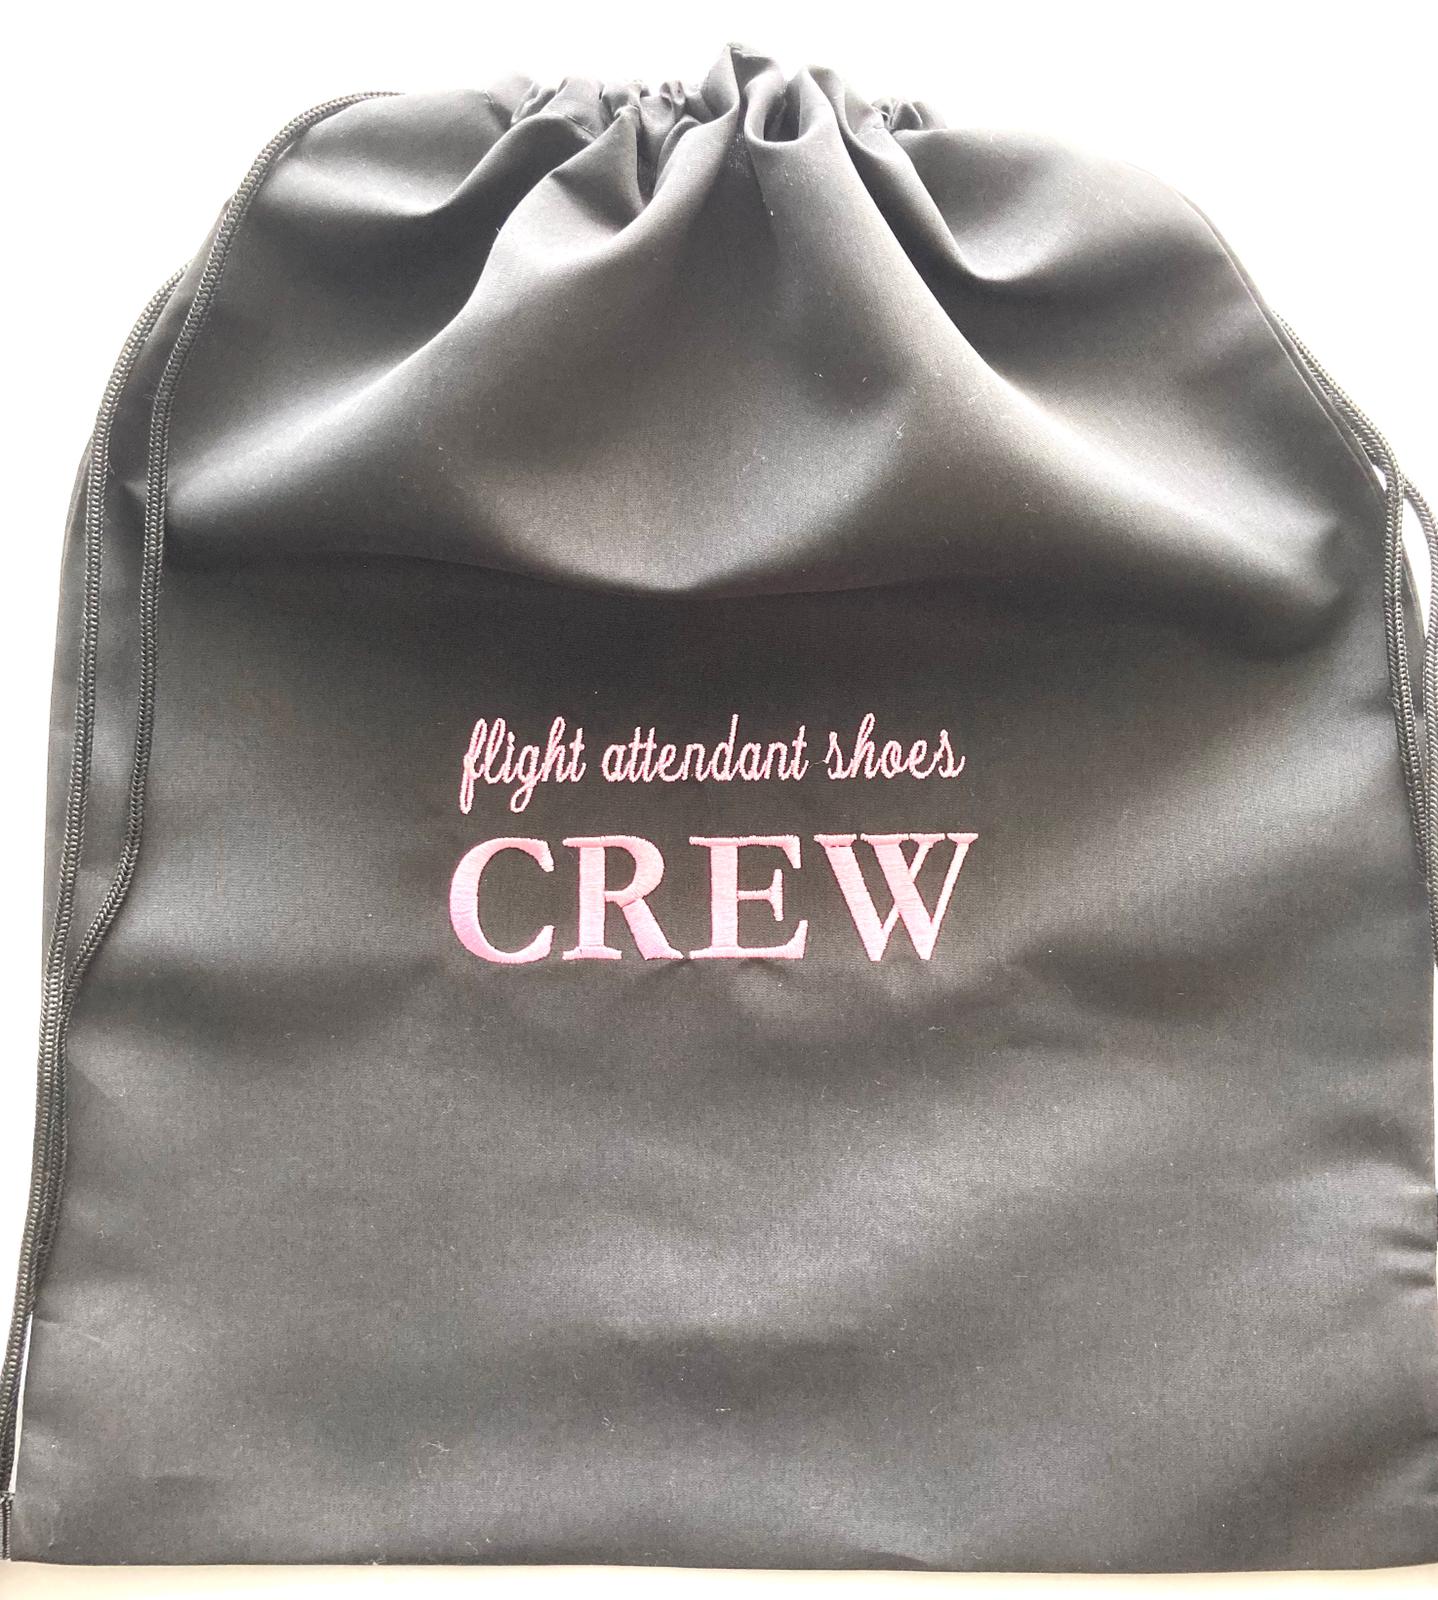 Flight attendant shoes CREW black and pink bag